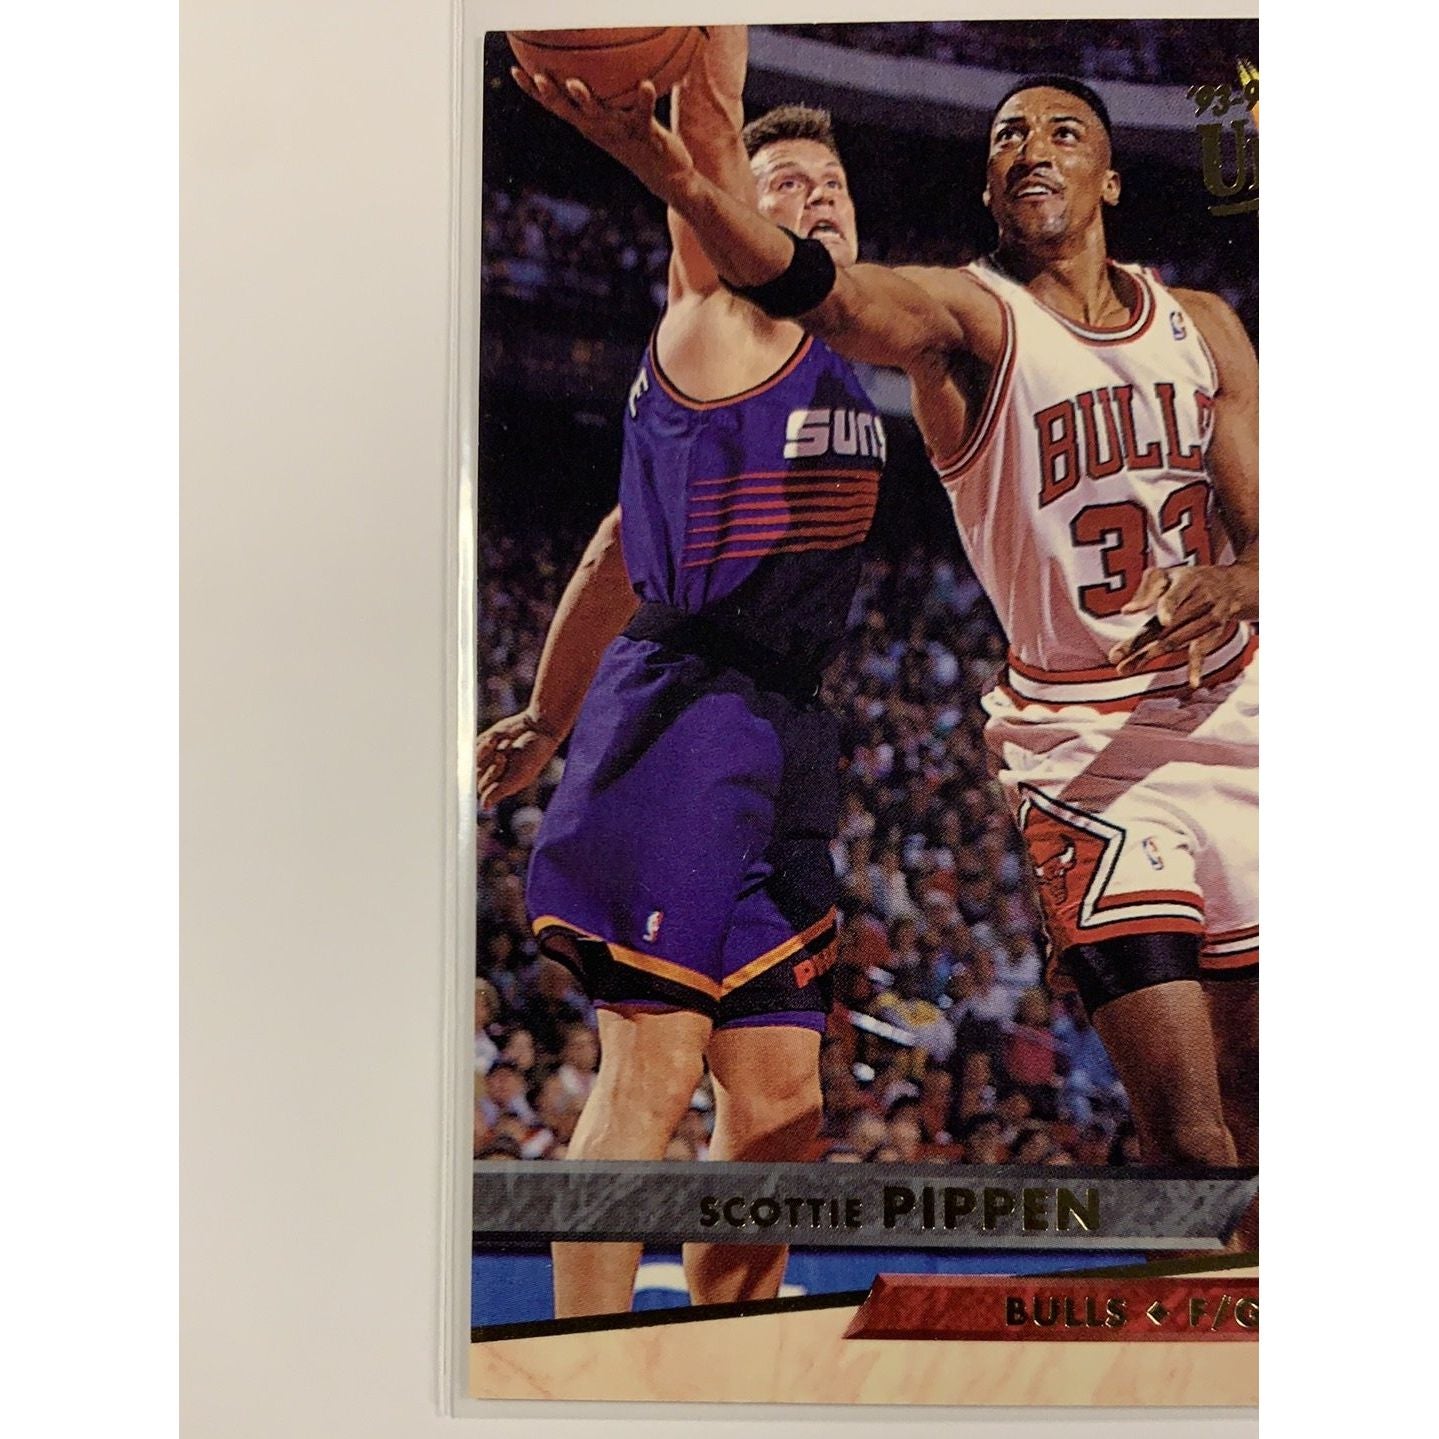  1993-94 Fleer Ultra Base #34  Local Legends Cards & Collectibles